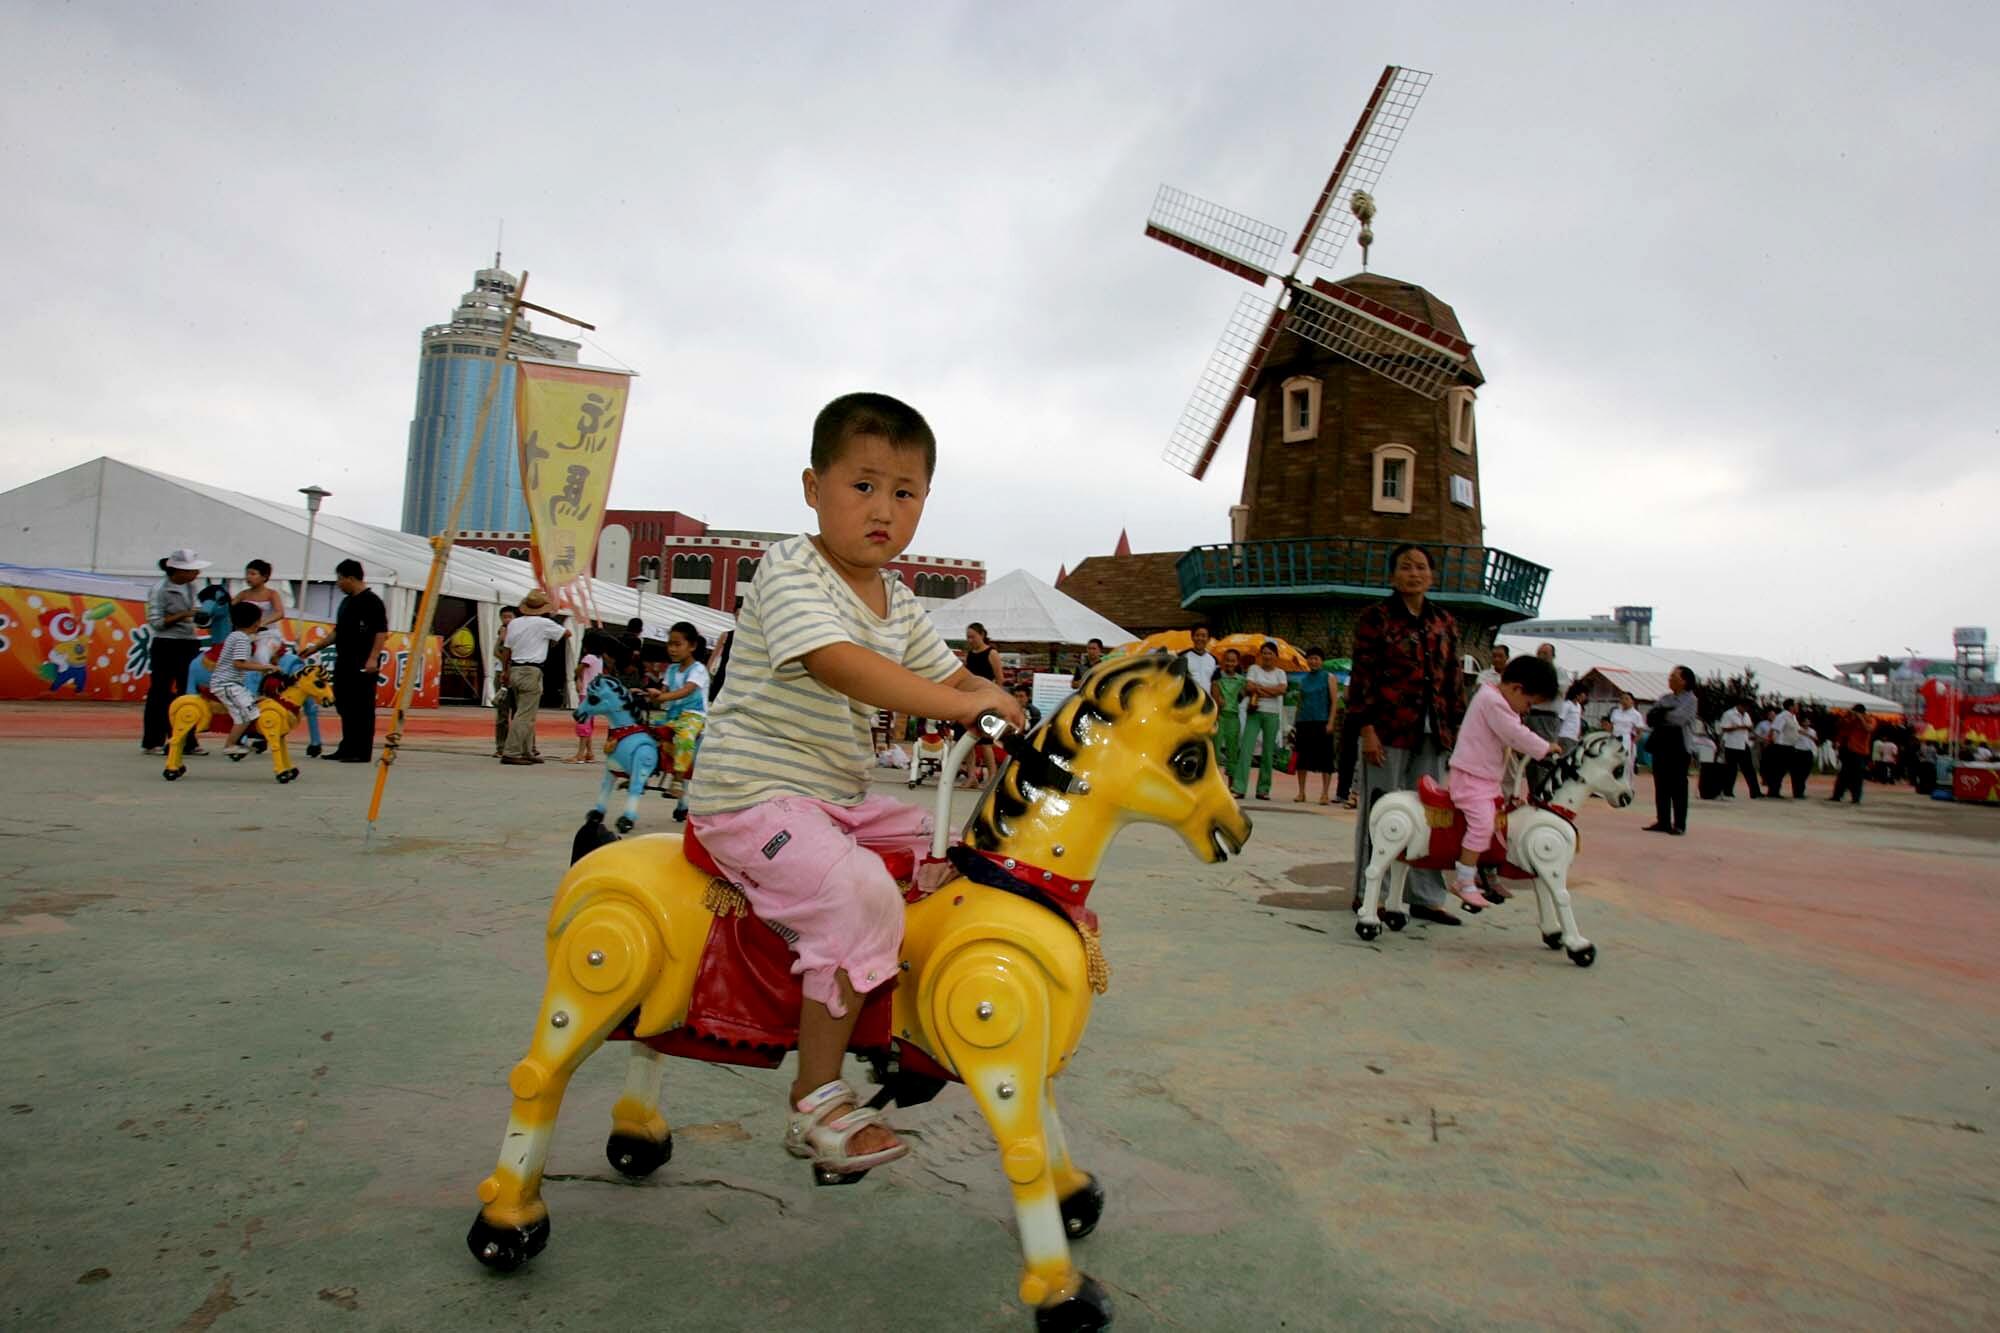 A child rides a yellow toy pony at a park with a windmill 